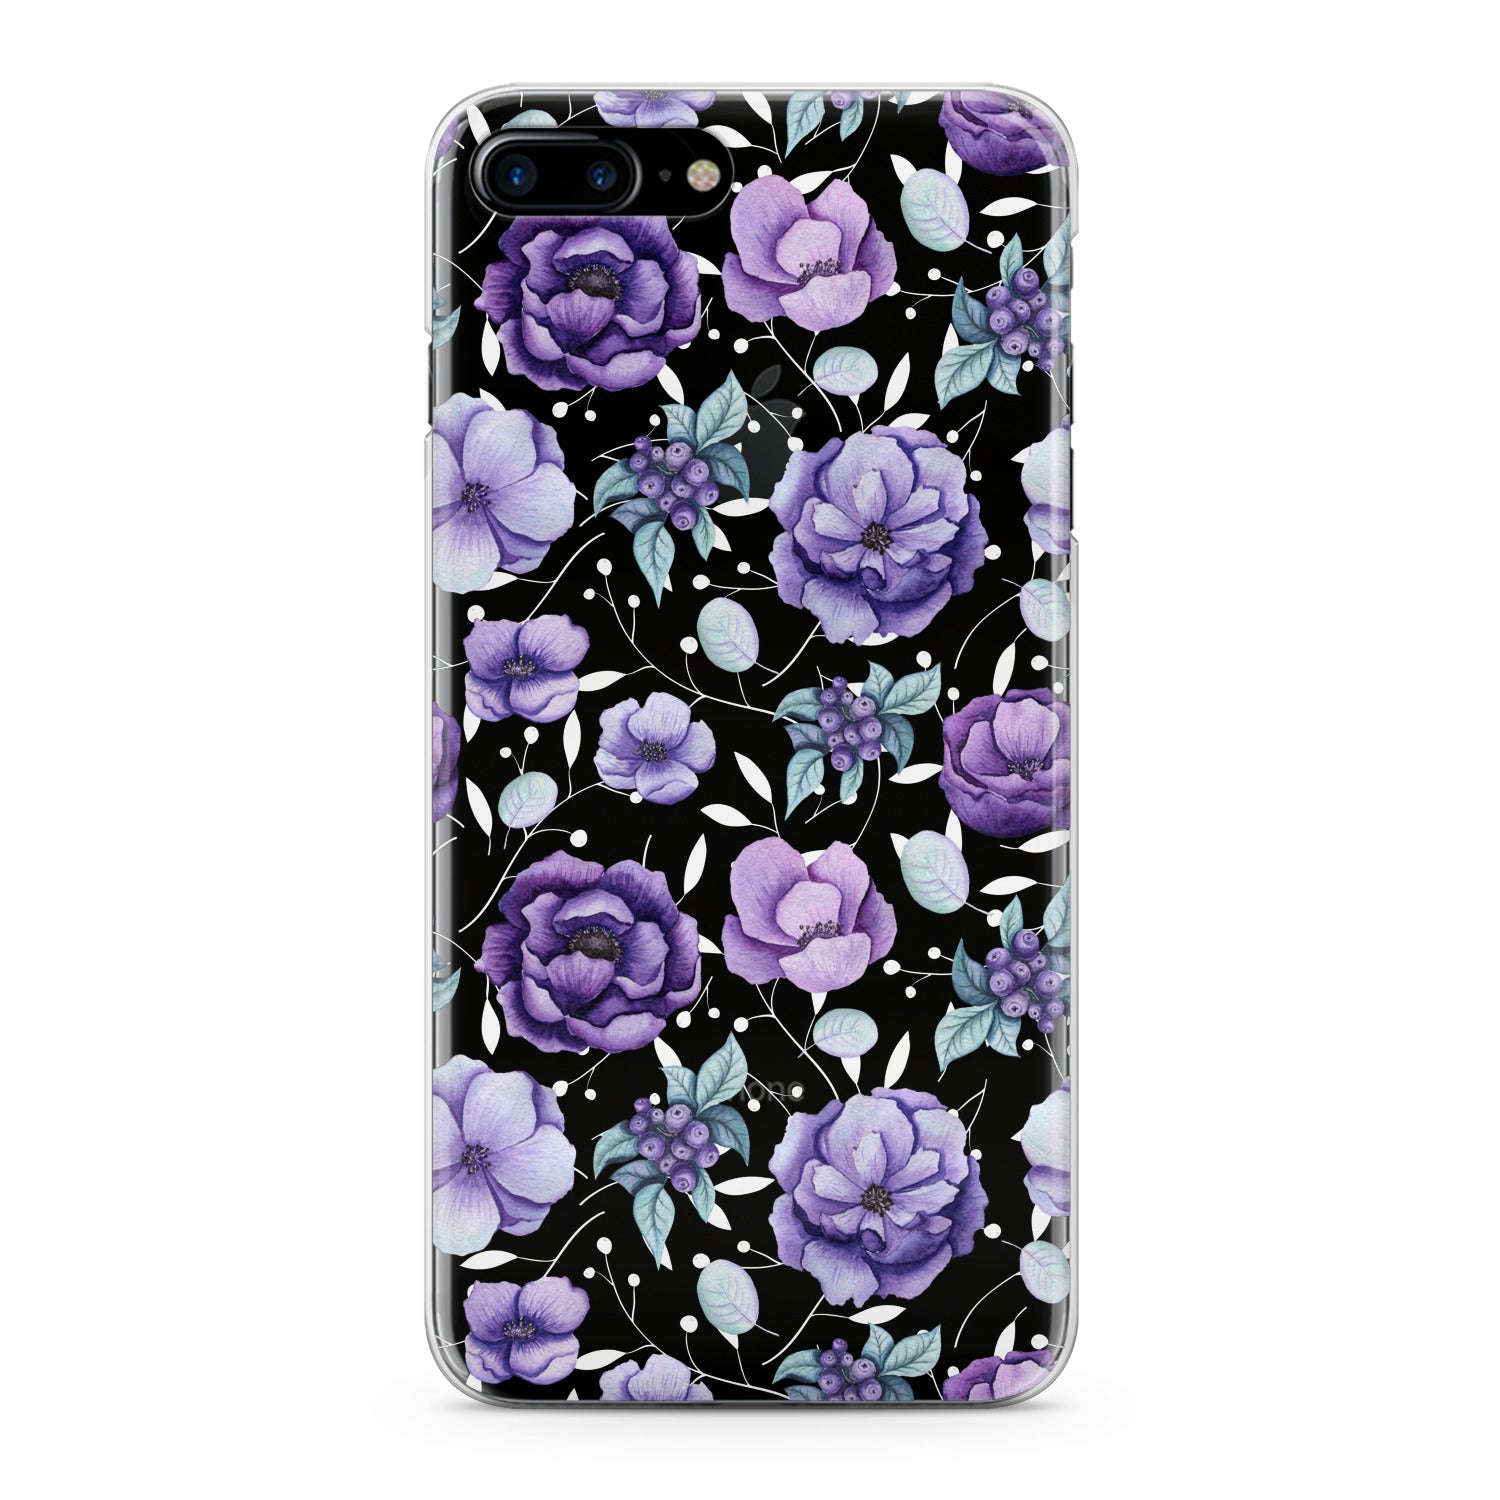 Lex Altern Floral Purple Beauty Phone Case for your iPhone & Android phone.